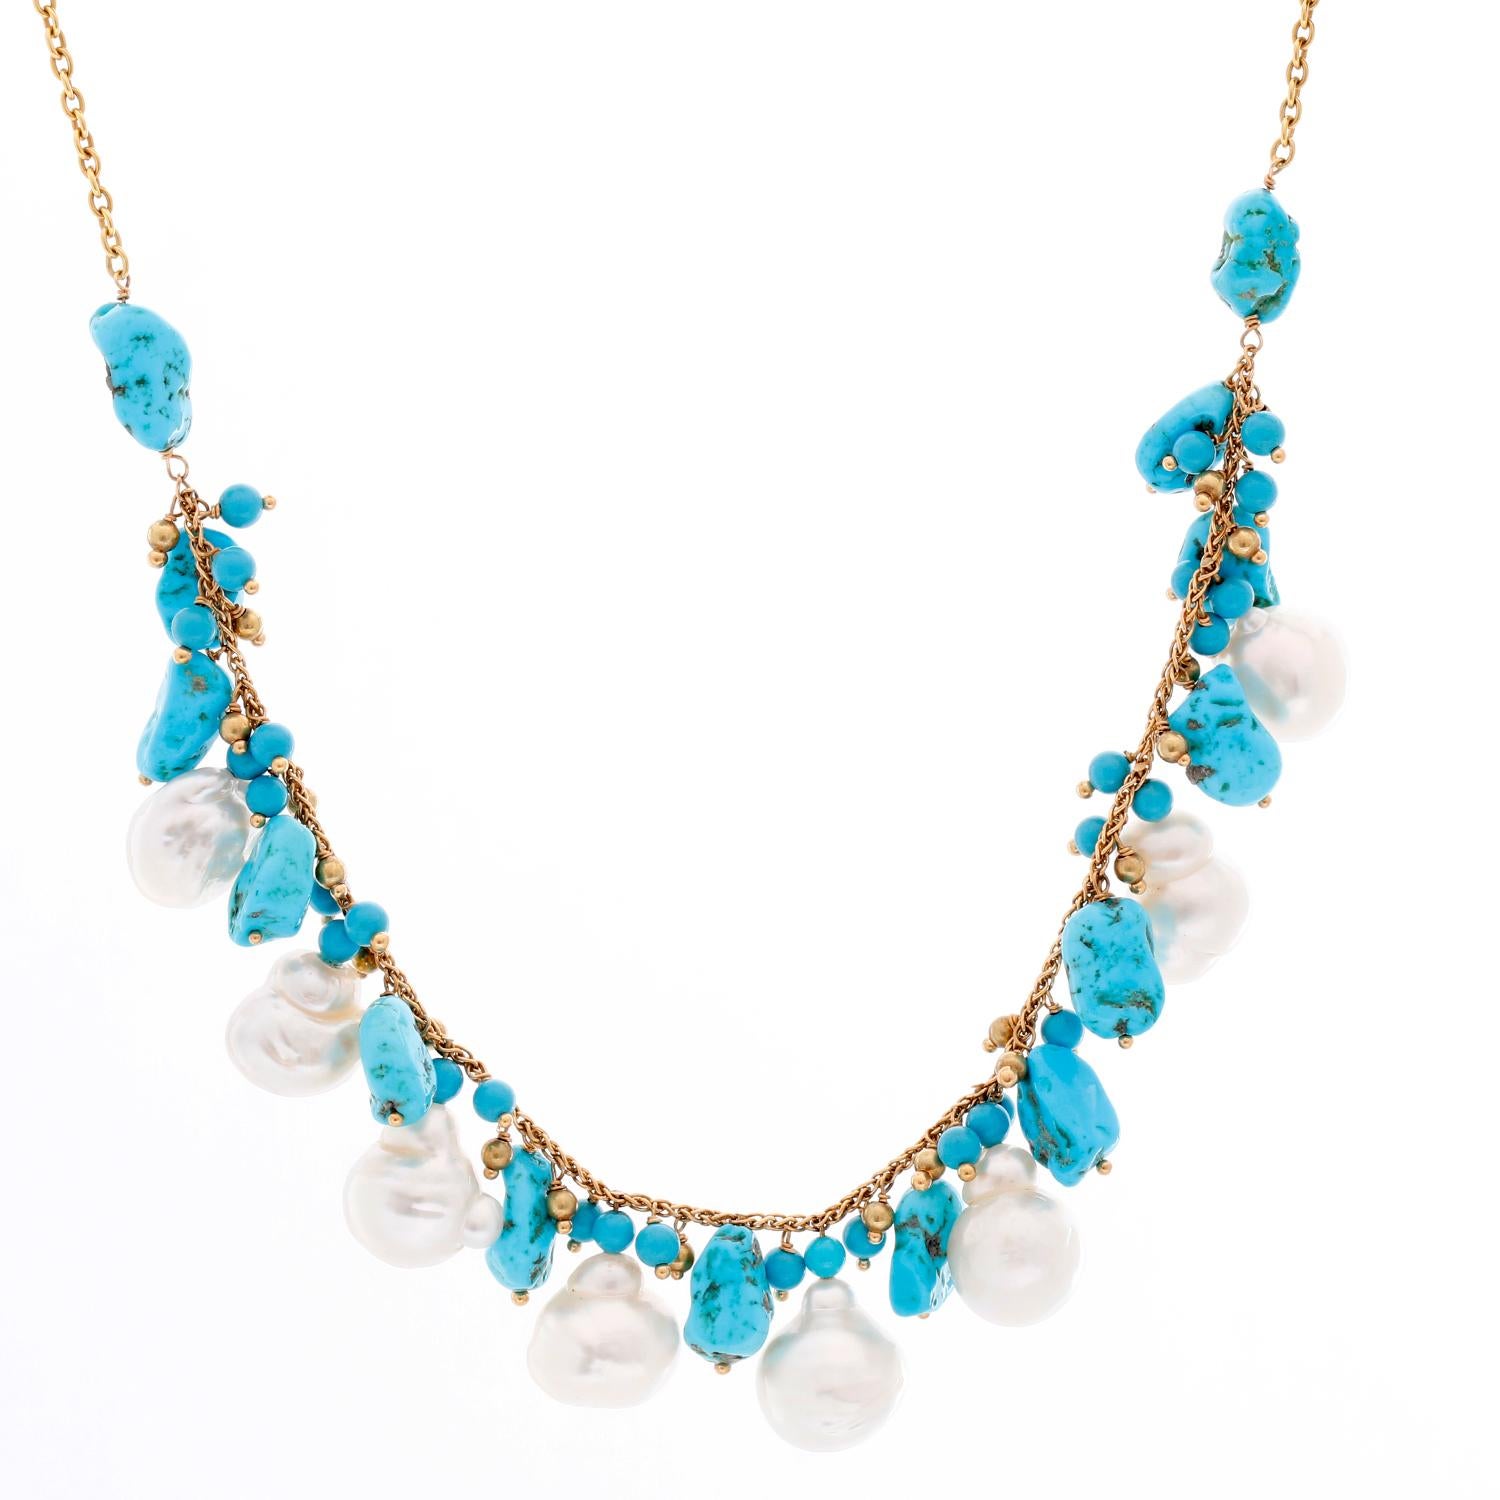 Turquoise and Baroque Pearls 14K Yellow Gold Necklace - Beautiful yellow gold necklace with 8 unique dangling baroque pearls separated by turquoise stones. Necklace measures 16 inches. Pre-owned with box. .